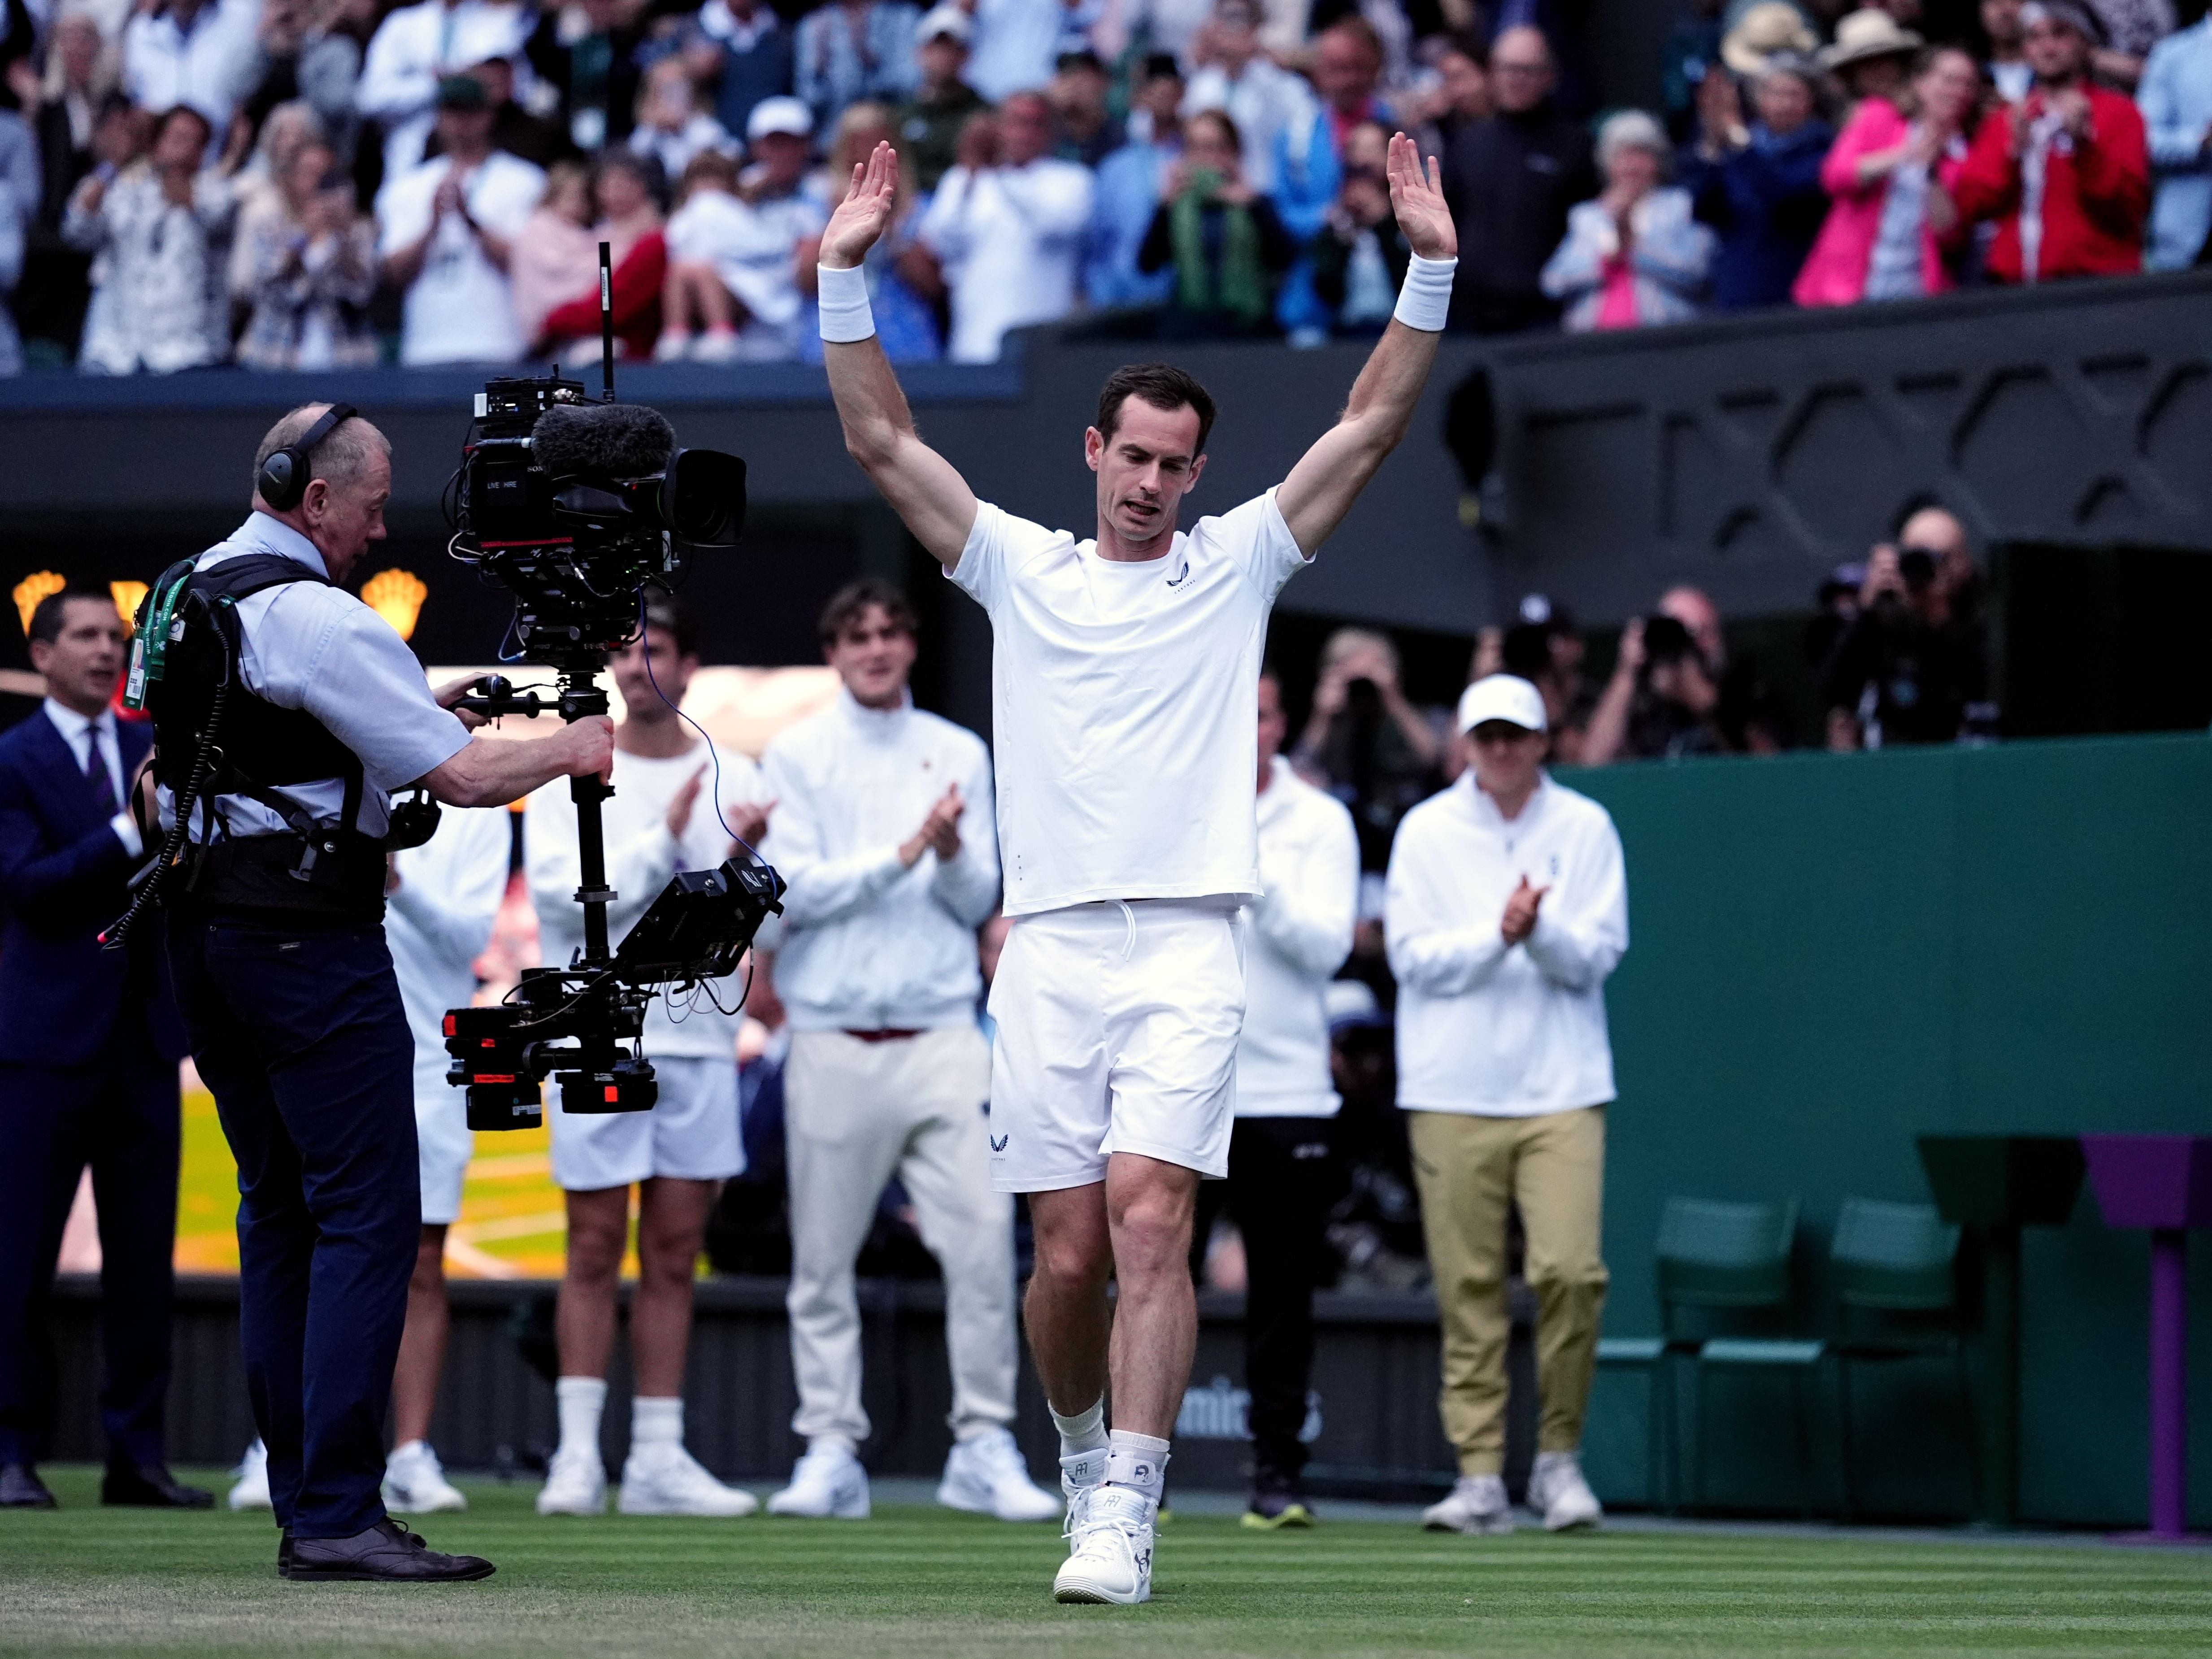 Andy Murray bids farewell but Emma Raducanu shows there’s life in British tennis